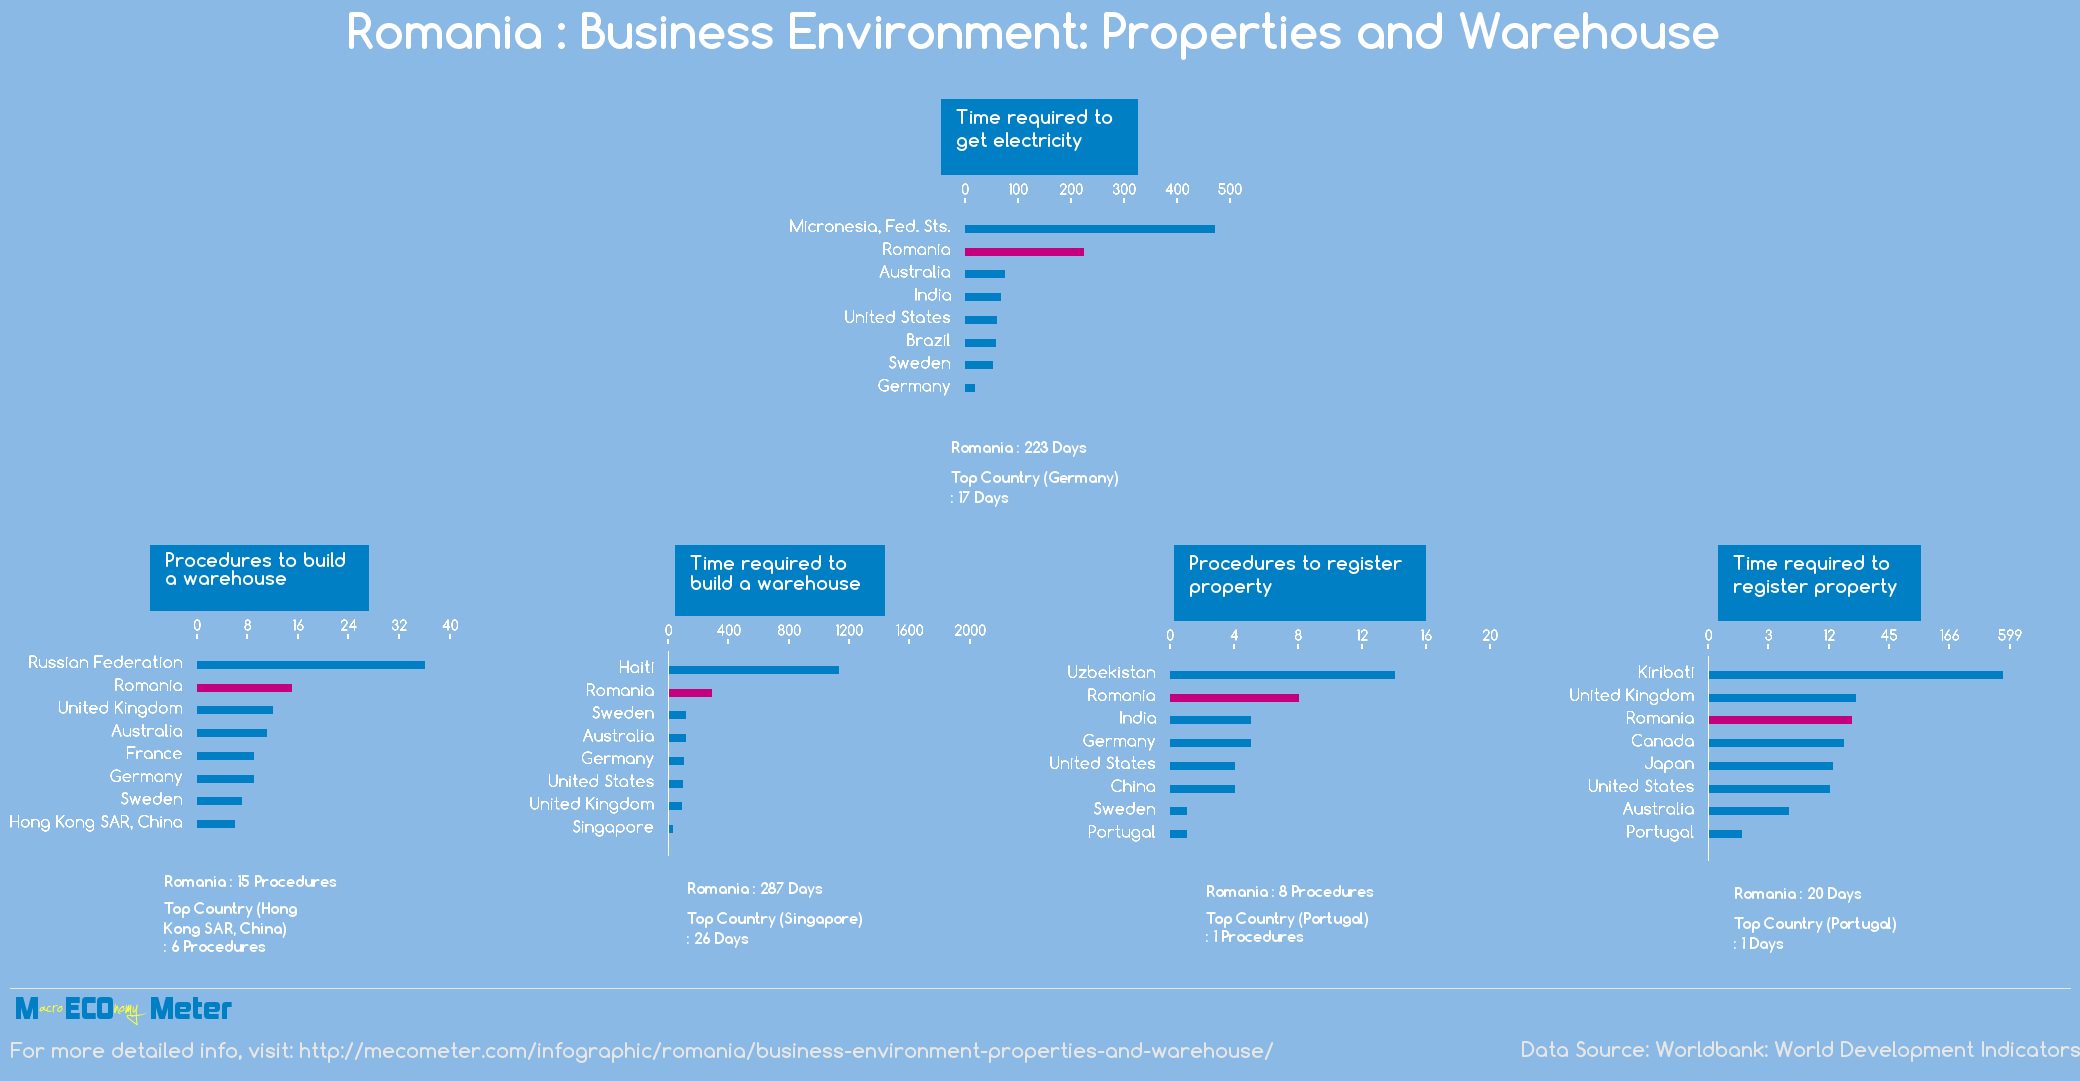 Romania : Business Environment: Properties and Warehouse 